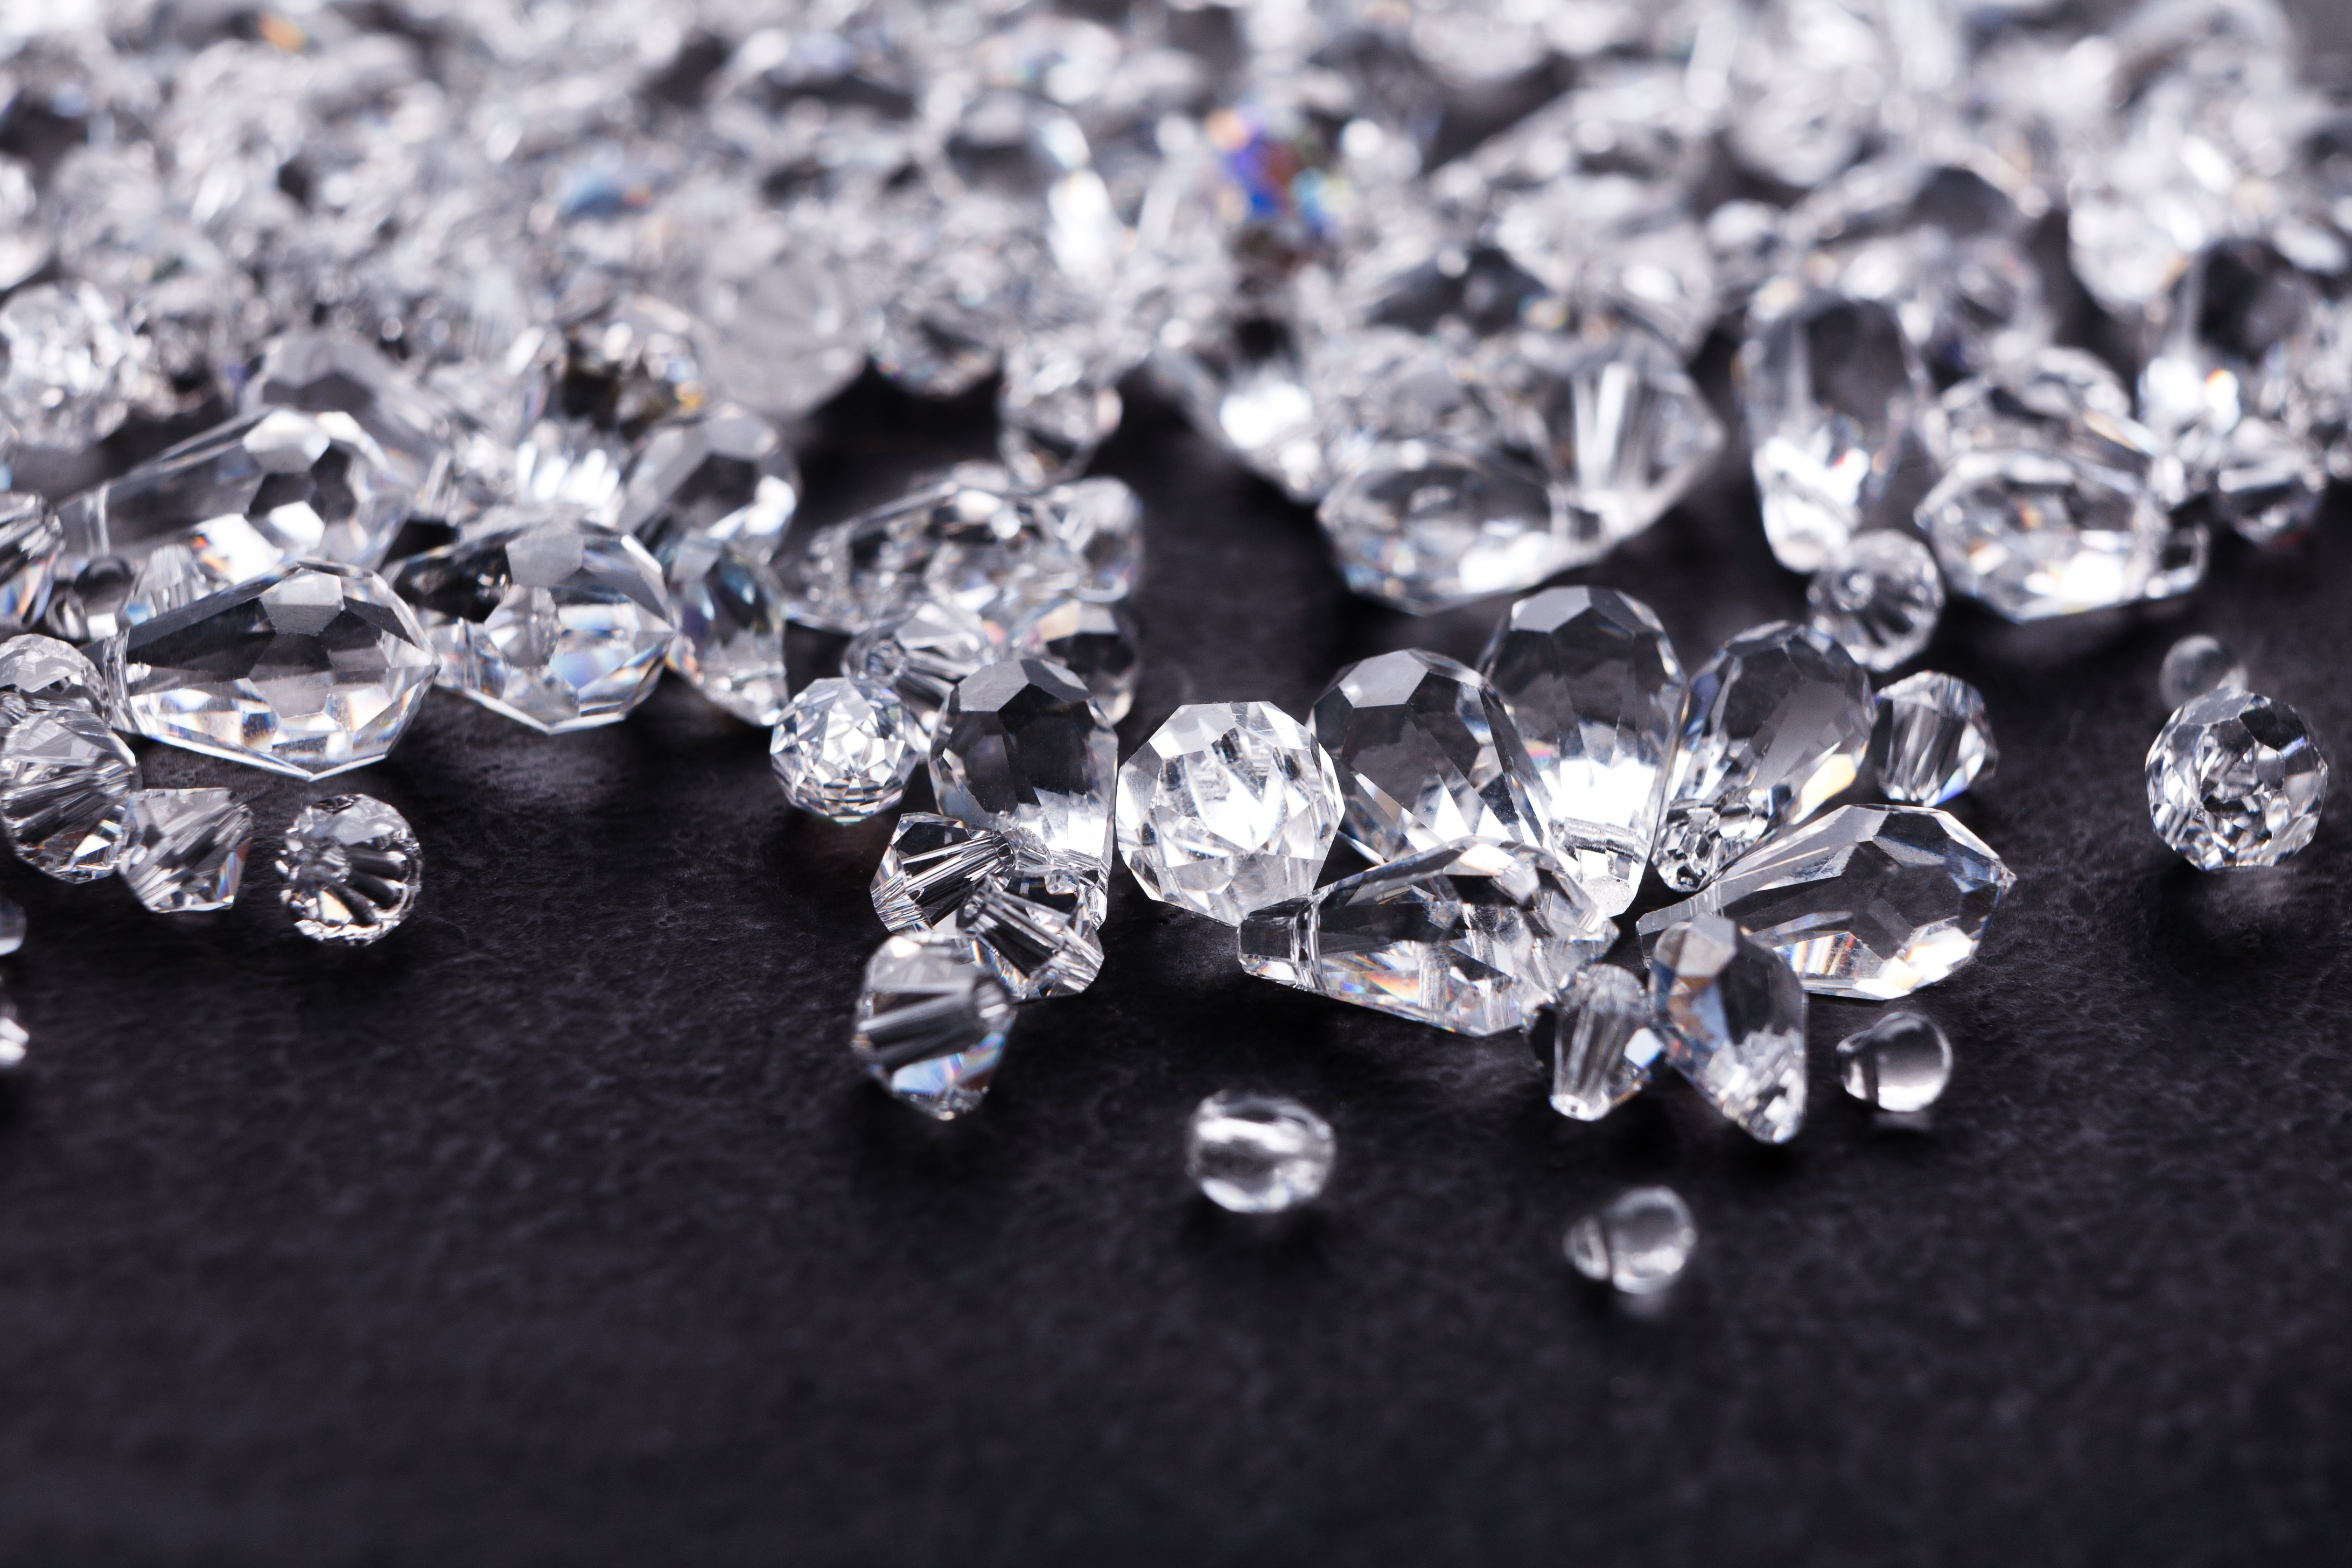 Diamonds of various sizes scatters across a dark base.